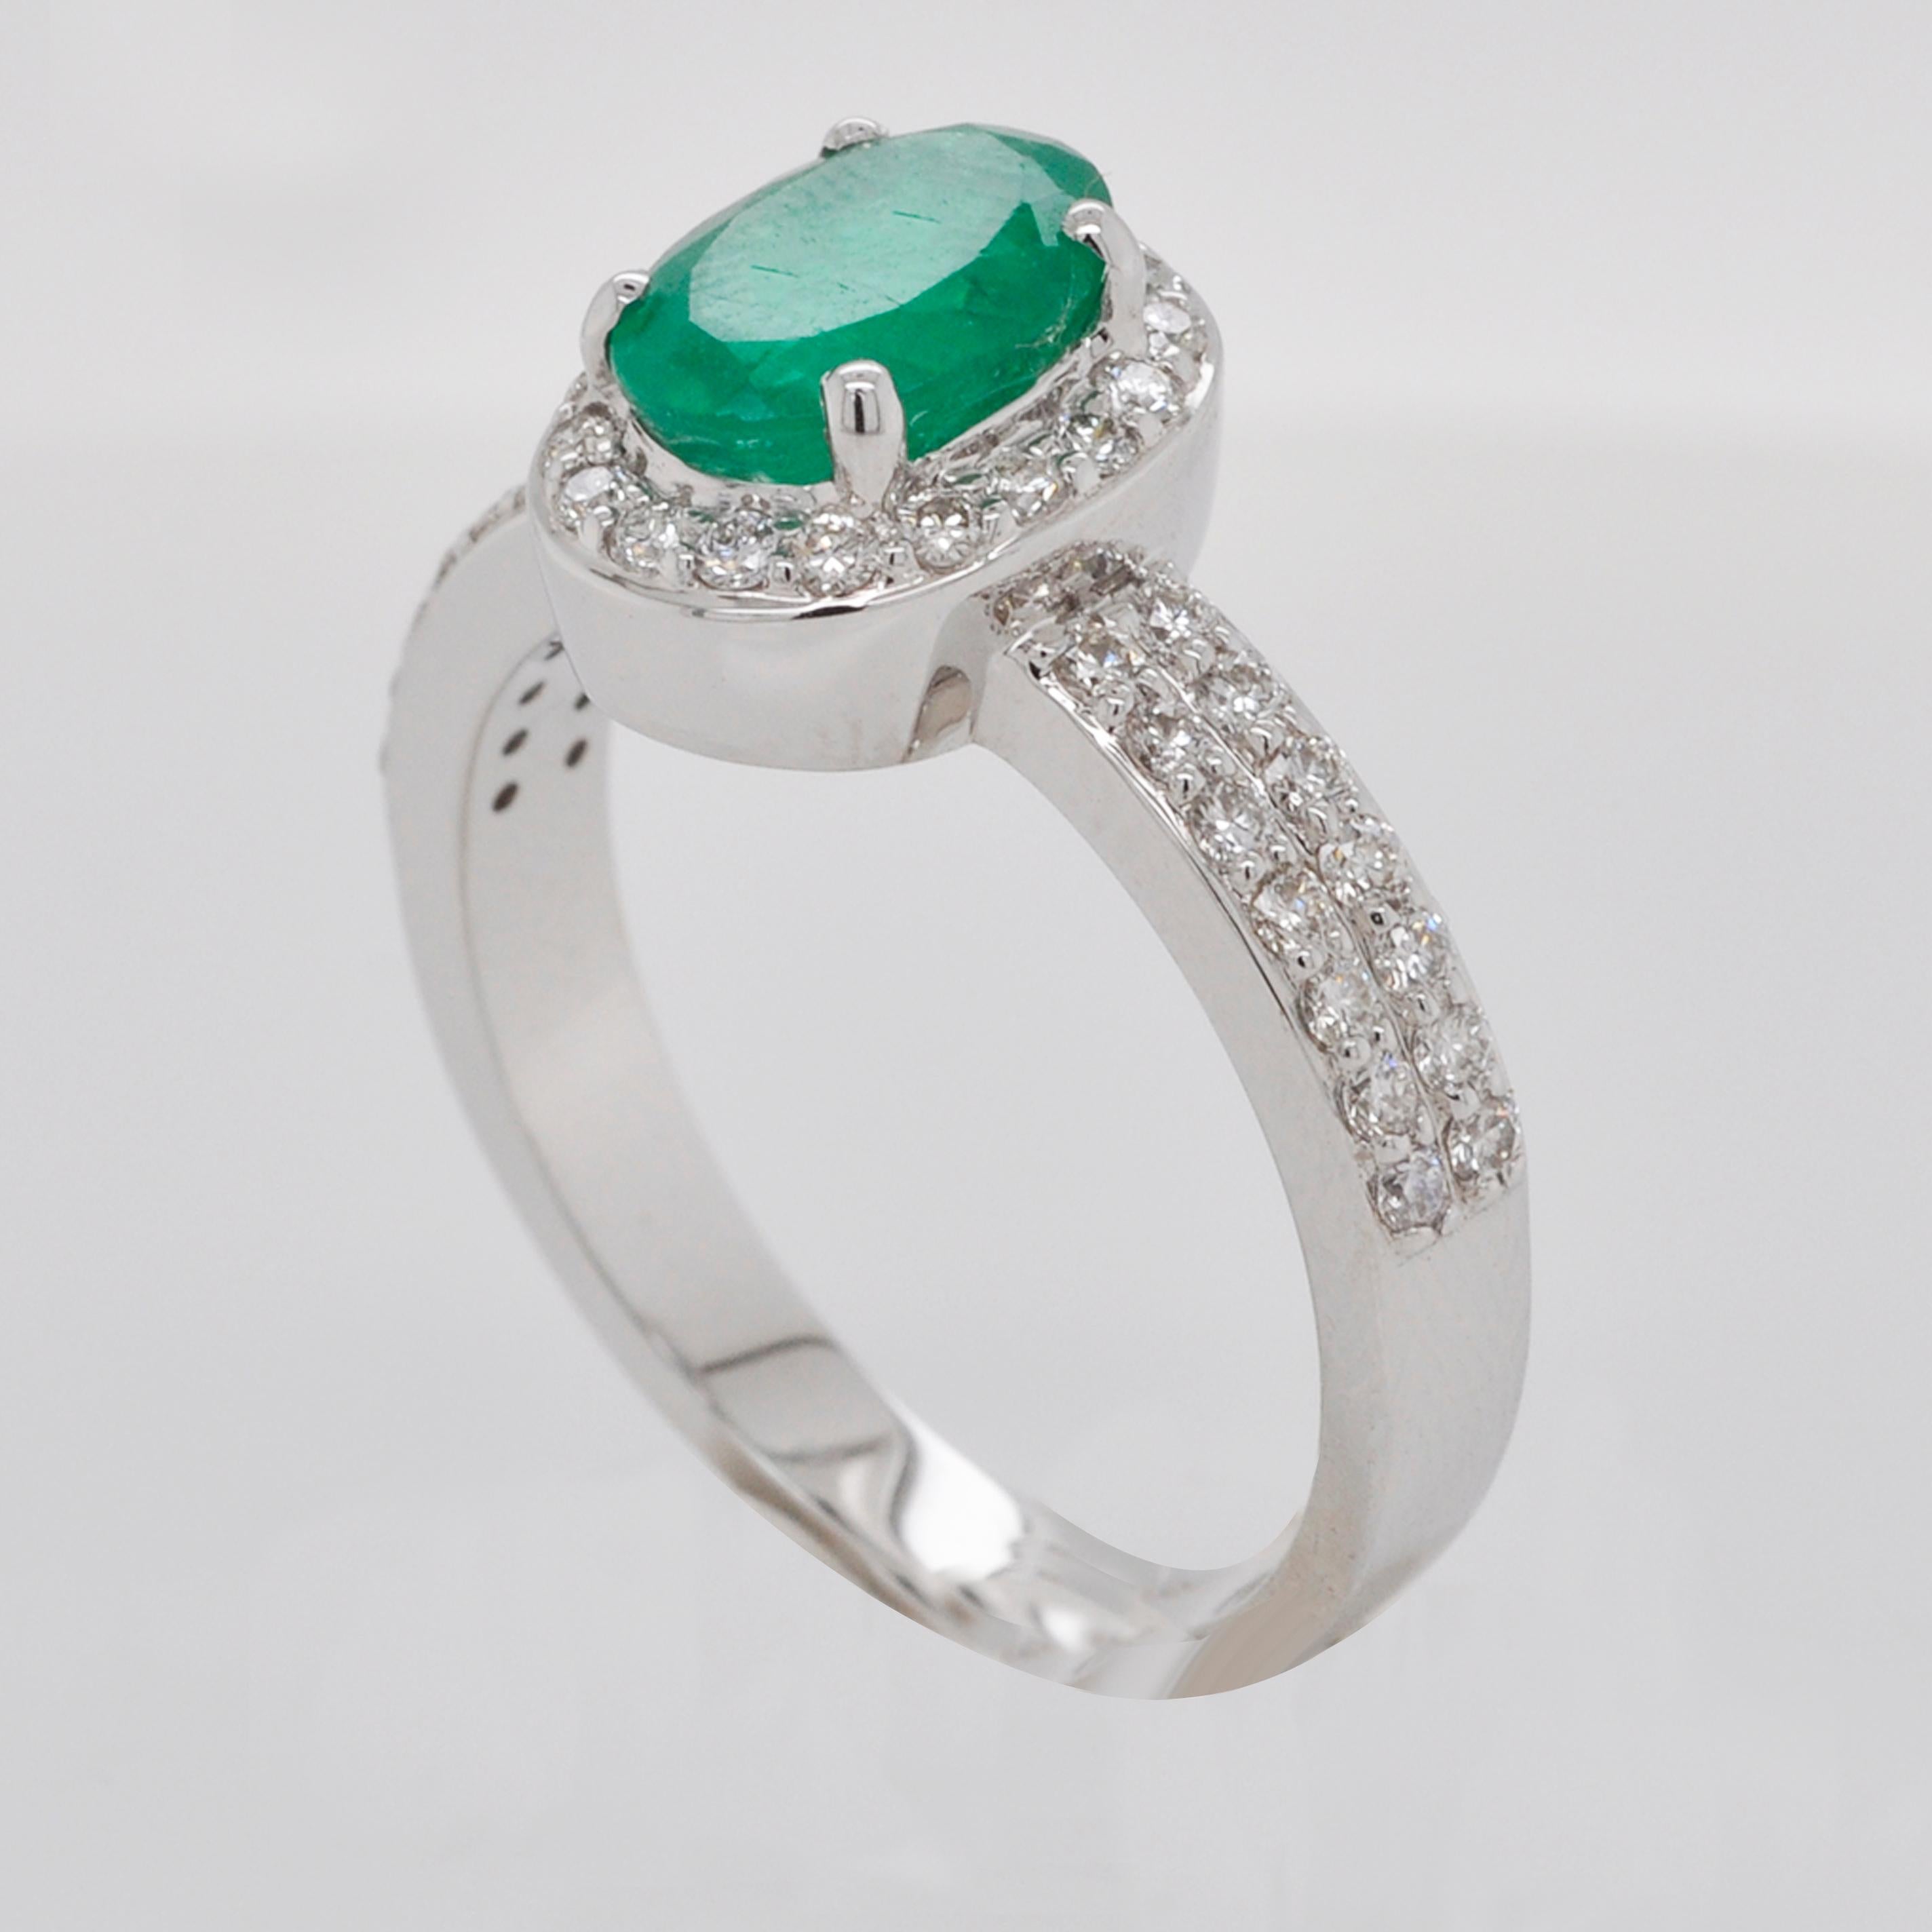 18 Karat White Gold 8.4x6.4 mm Oval Colombian Emerald Diamond Contemporary Ring For Sale 3